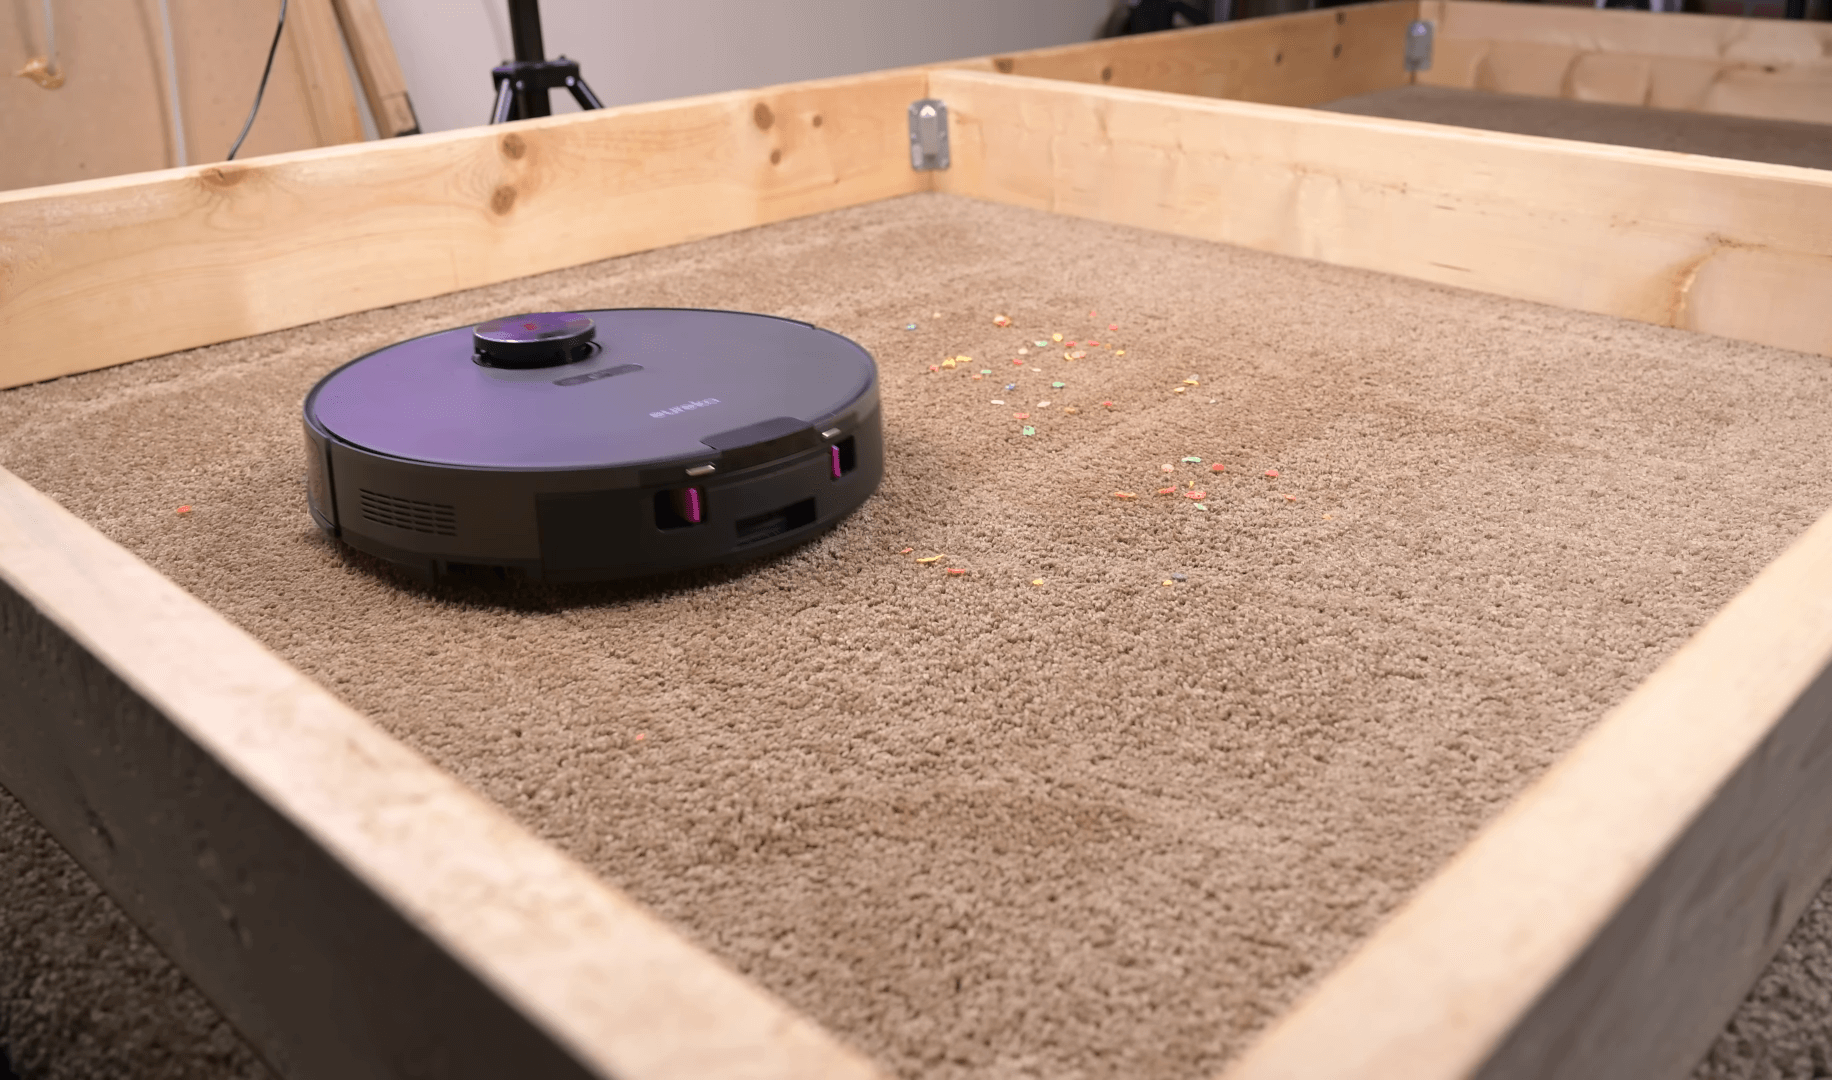 The E10S on a carpeted test area, surrounded by scattered multicolored particles